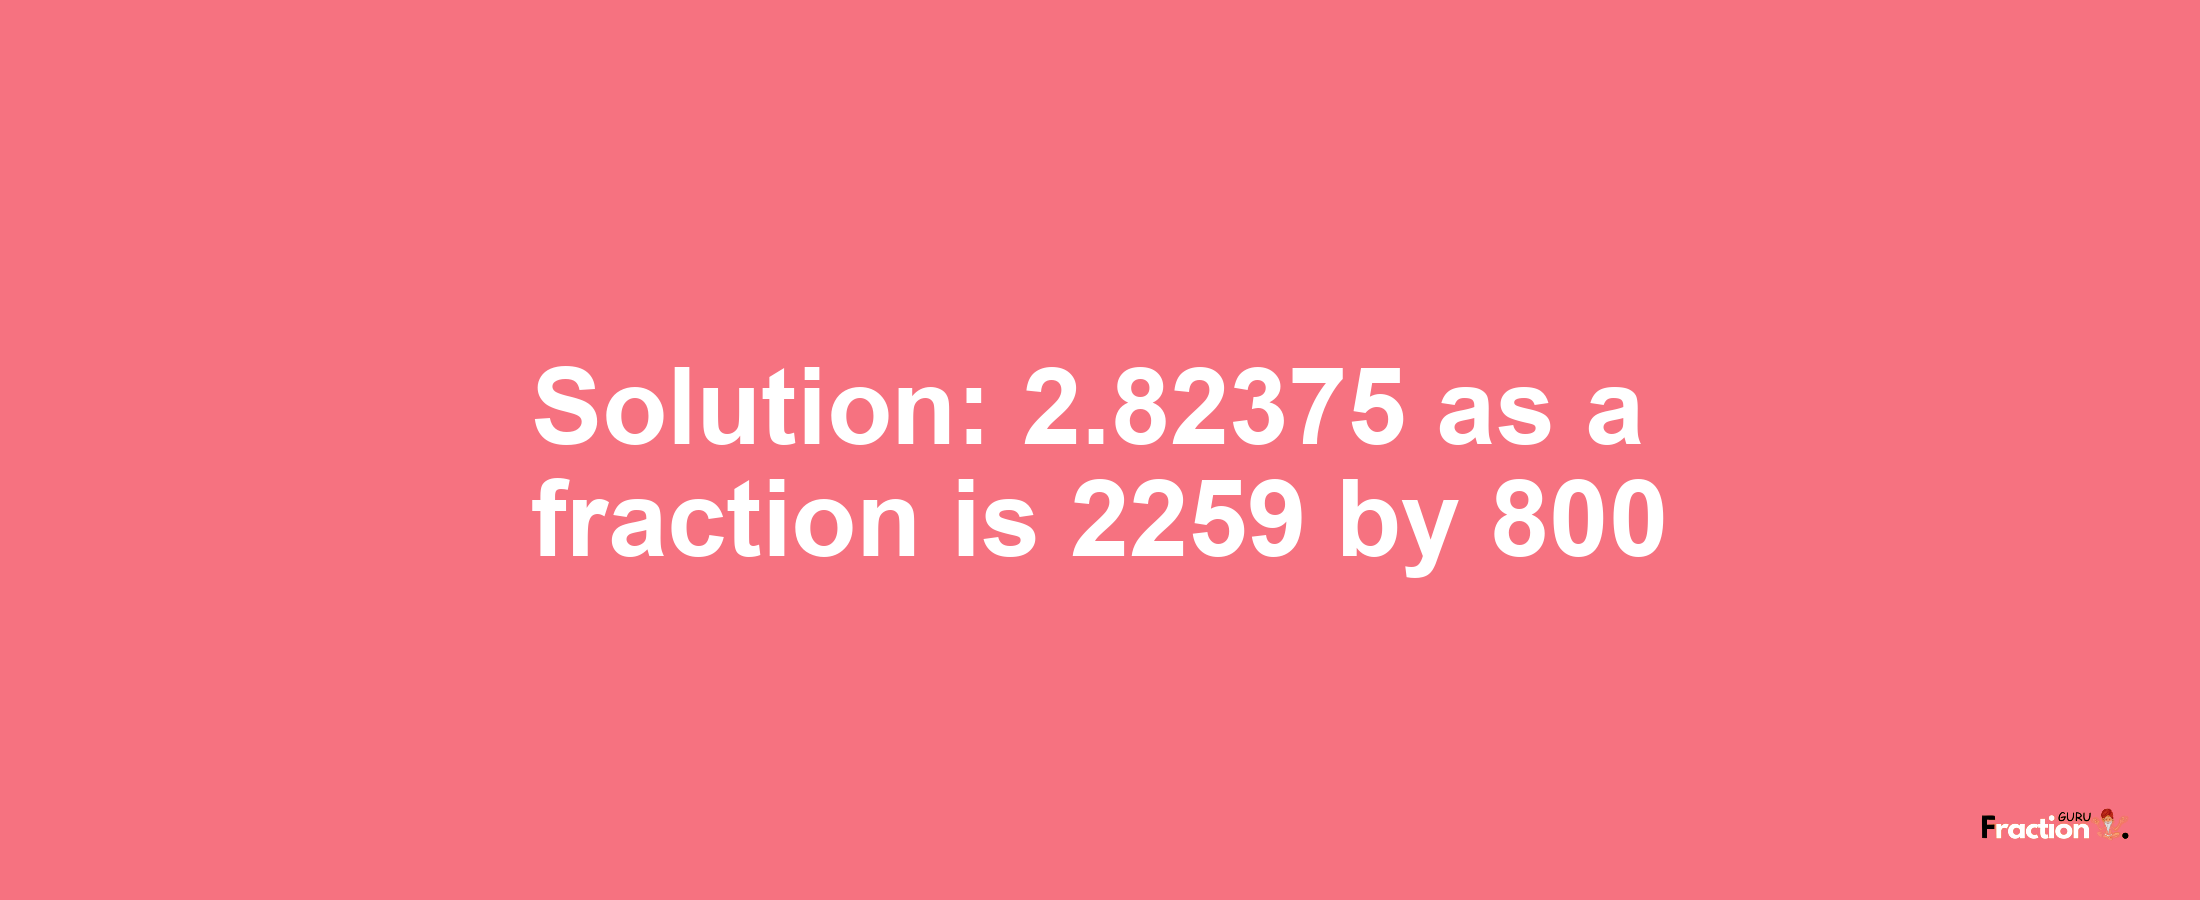 Solution:2.82375 as a fraction is 2259/800